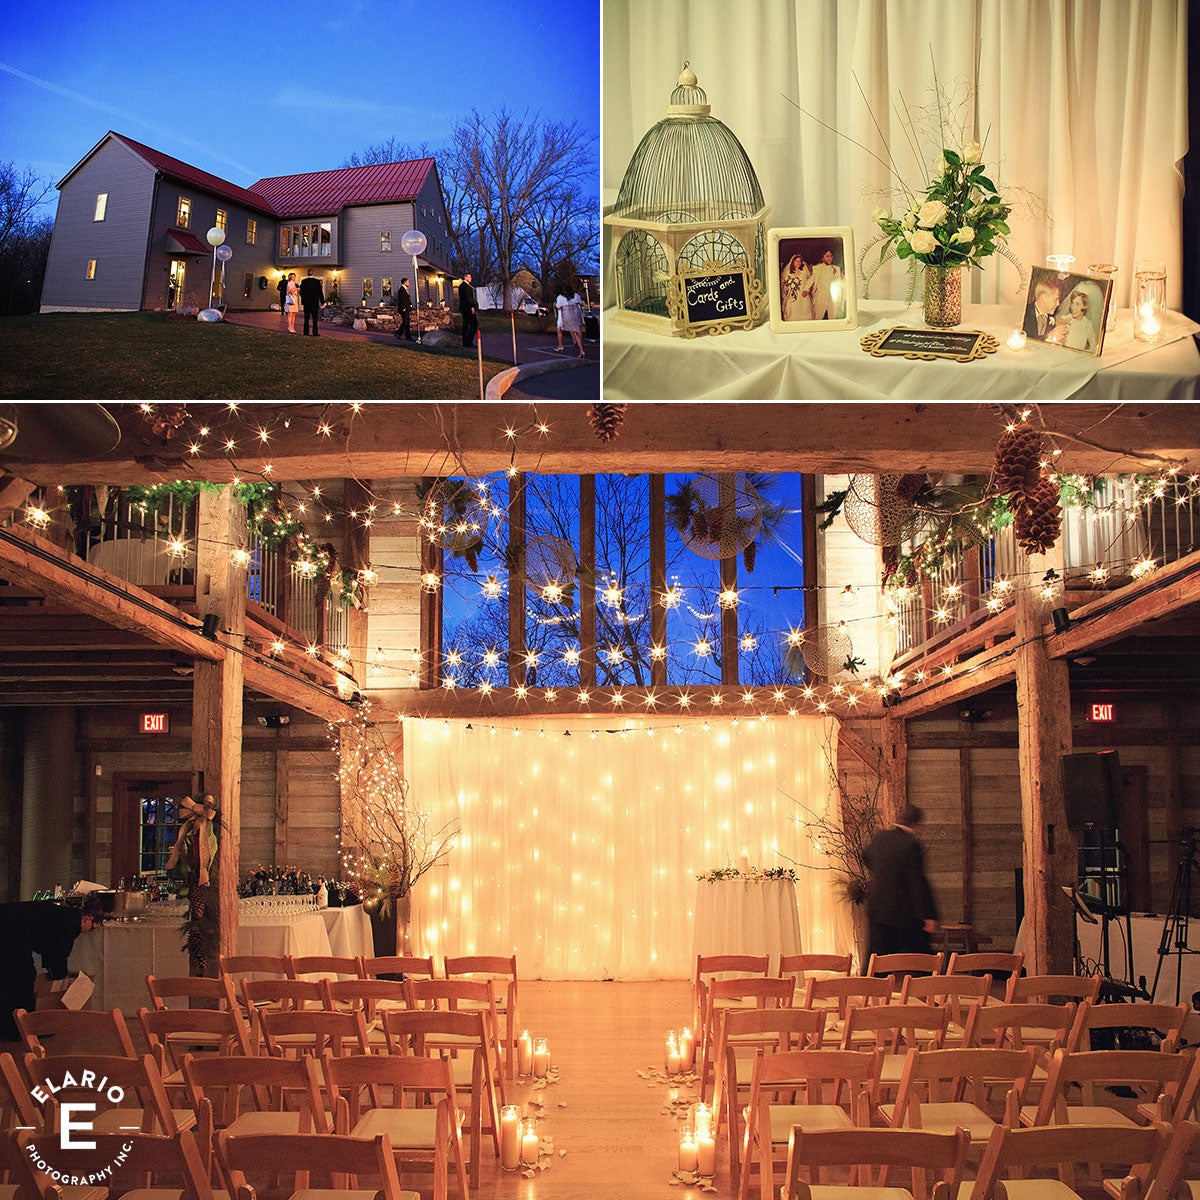 Three images showing a wedding at Pat's Barn: (1) Guests entering, (2) A decorated welcome table, (3) Setup for a ceremony inside of Pat's Barn 